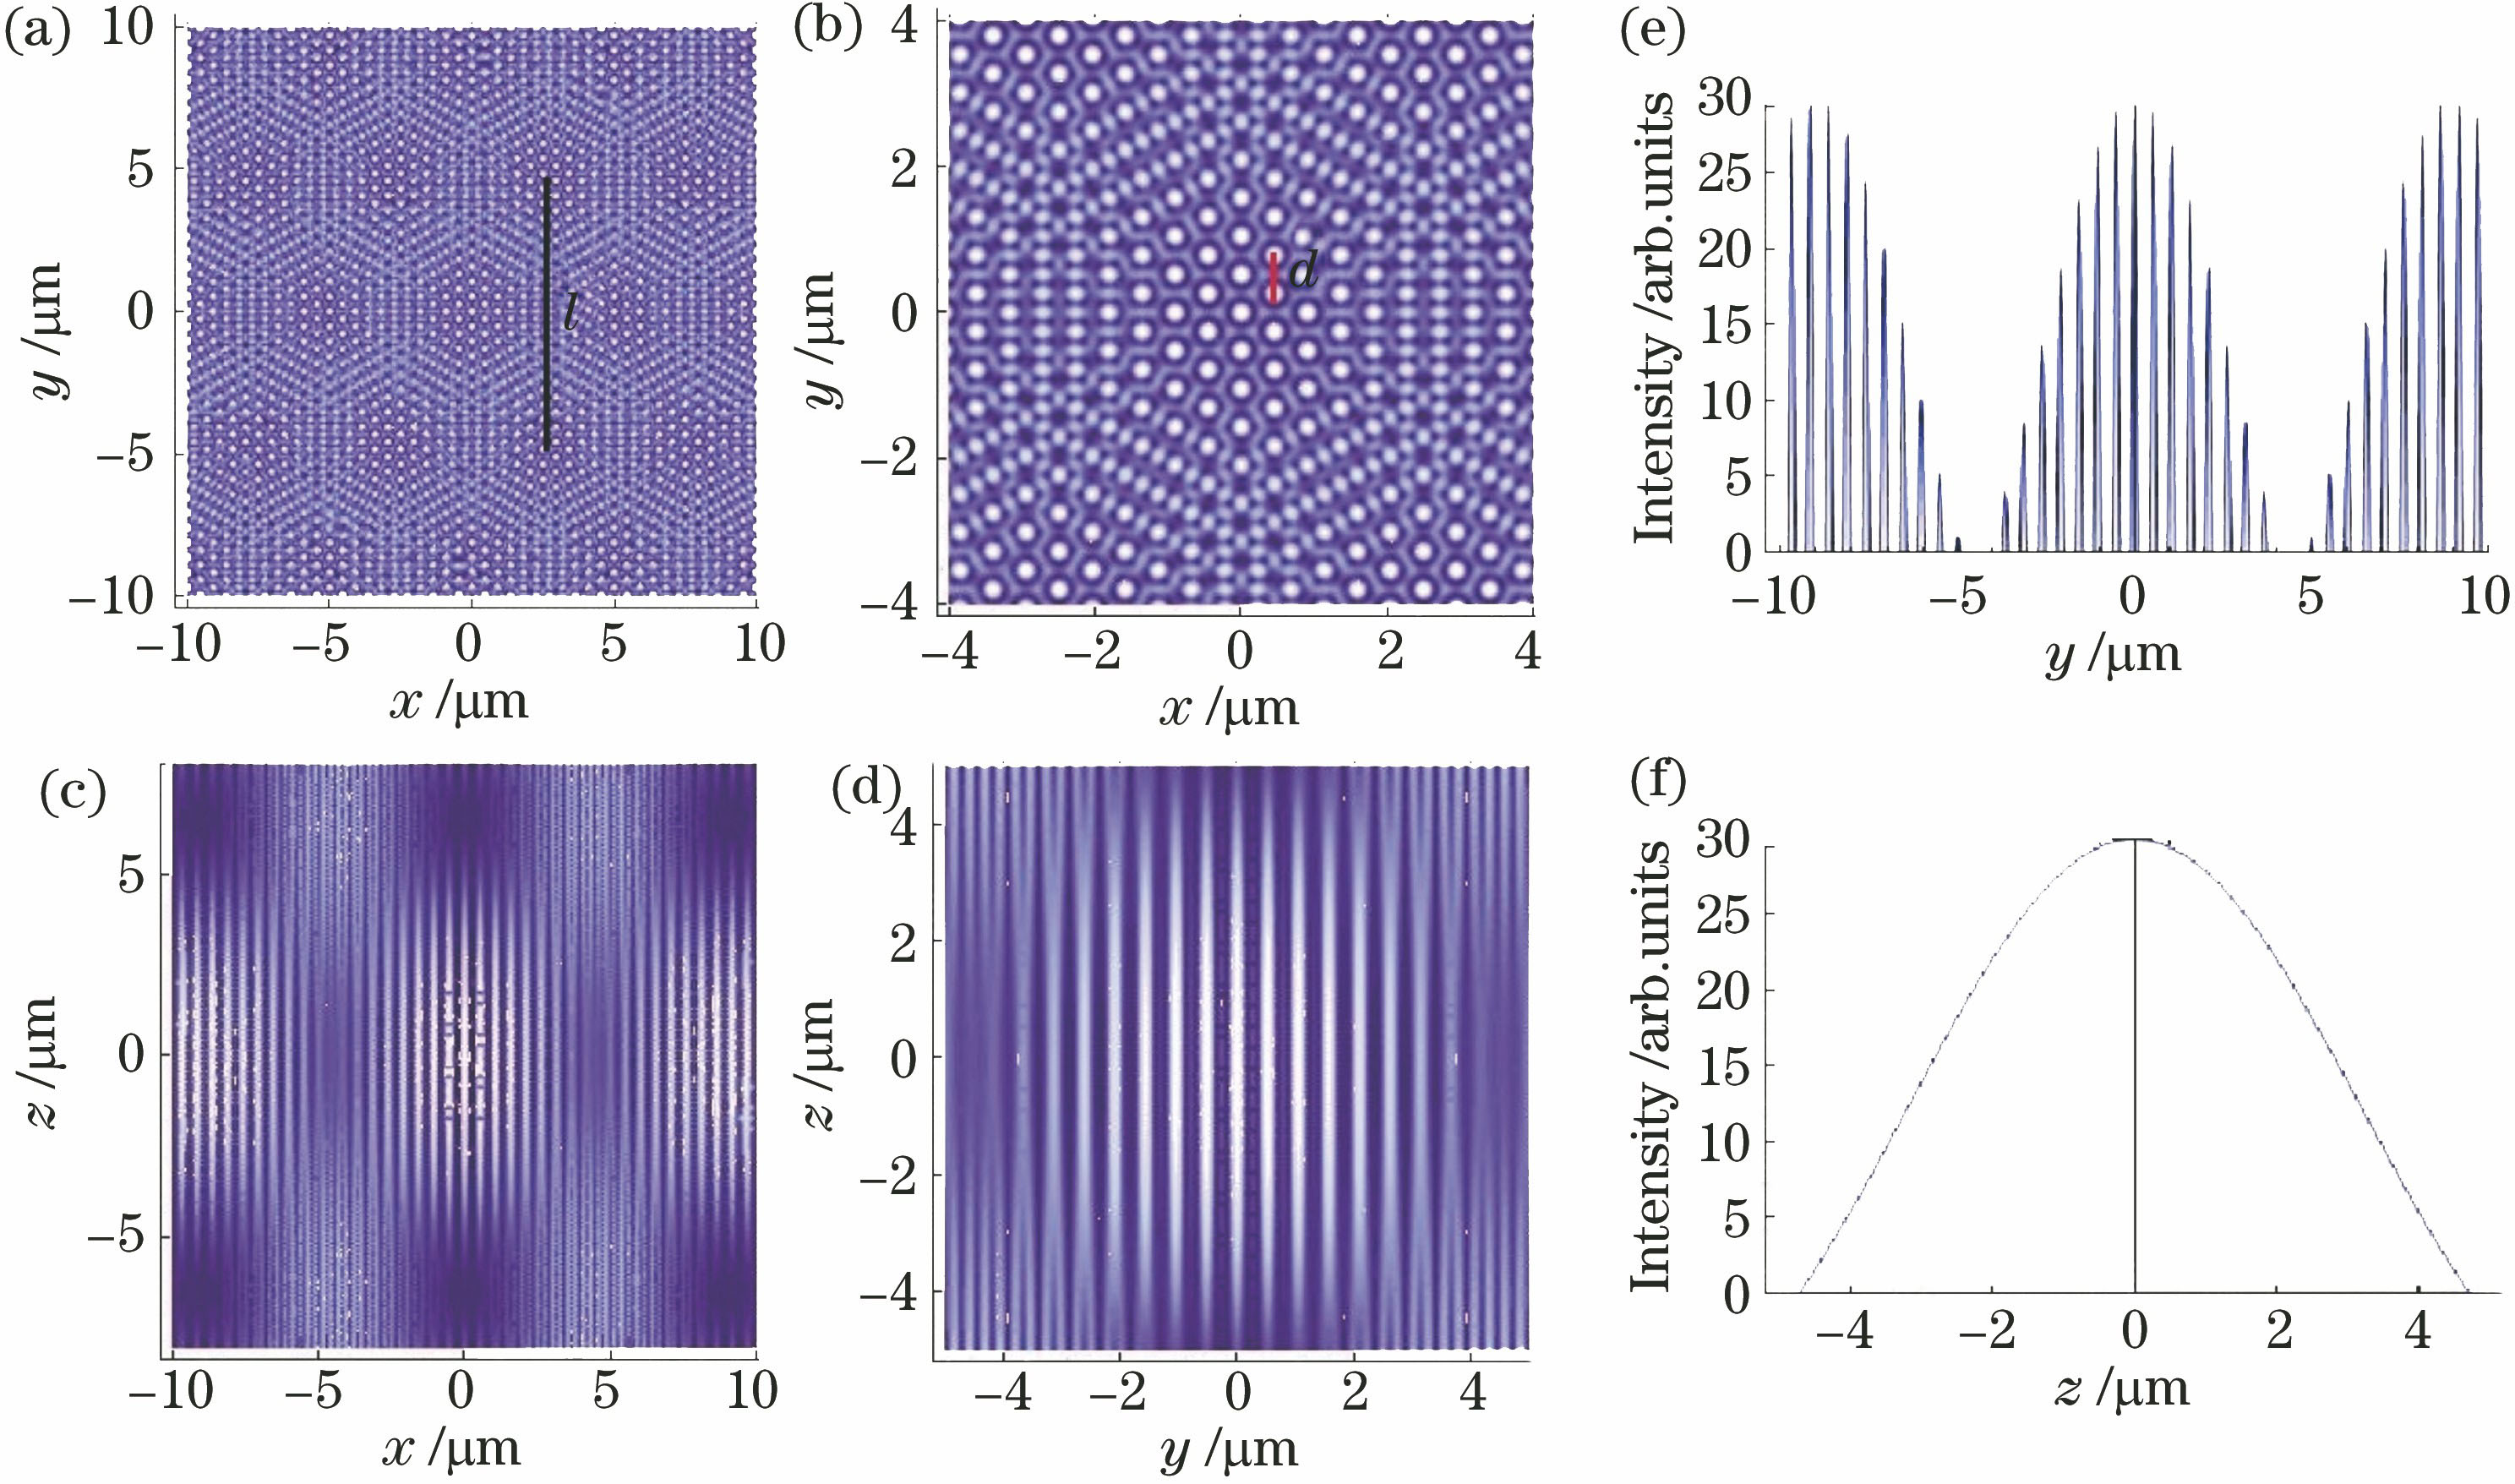 2D interference patterns, magnification map, and 1D intensity distribution. (a) 2D interference patterns along x-y plane; (b) magnified patterns along x-y plane; (c) 2D interference patterns along y-z plane; (d) magnified patterns along y-z plane; (e) 1D intensity along y-axis; (f) 1D intensity along z-axis